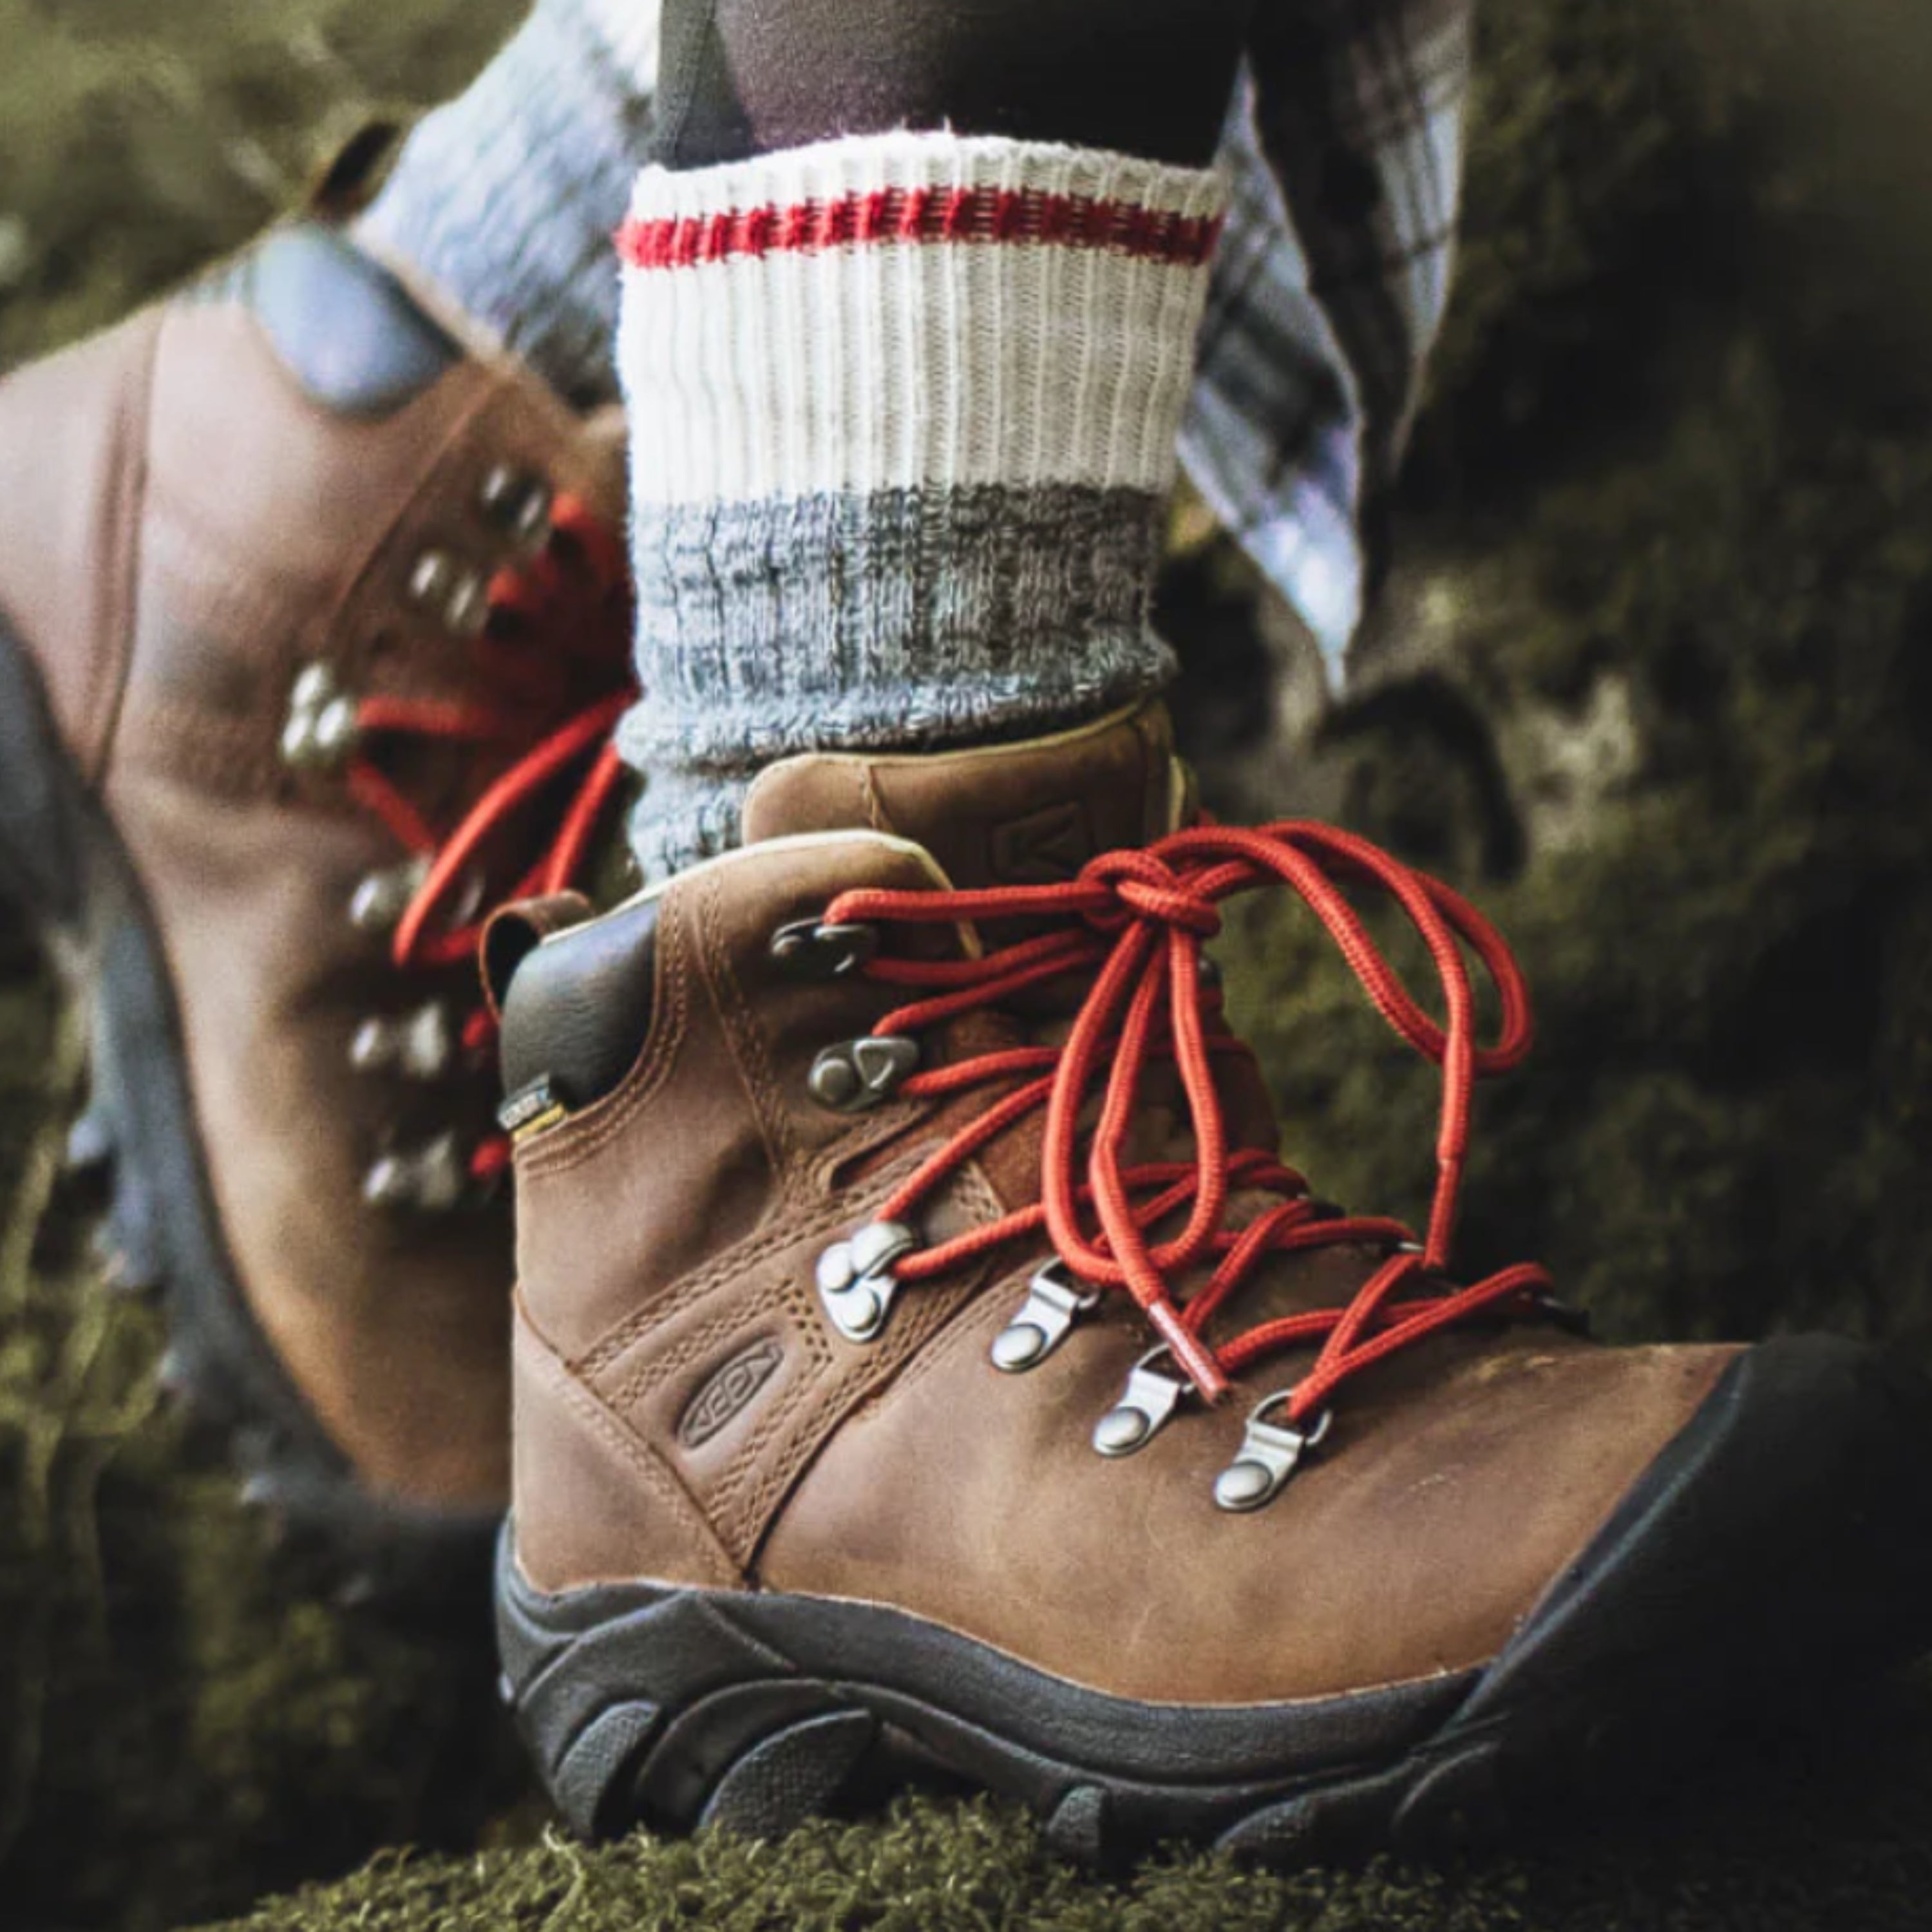 "Pyrenees" Hiking boots - Women's